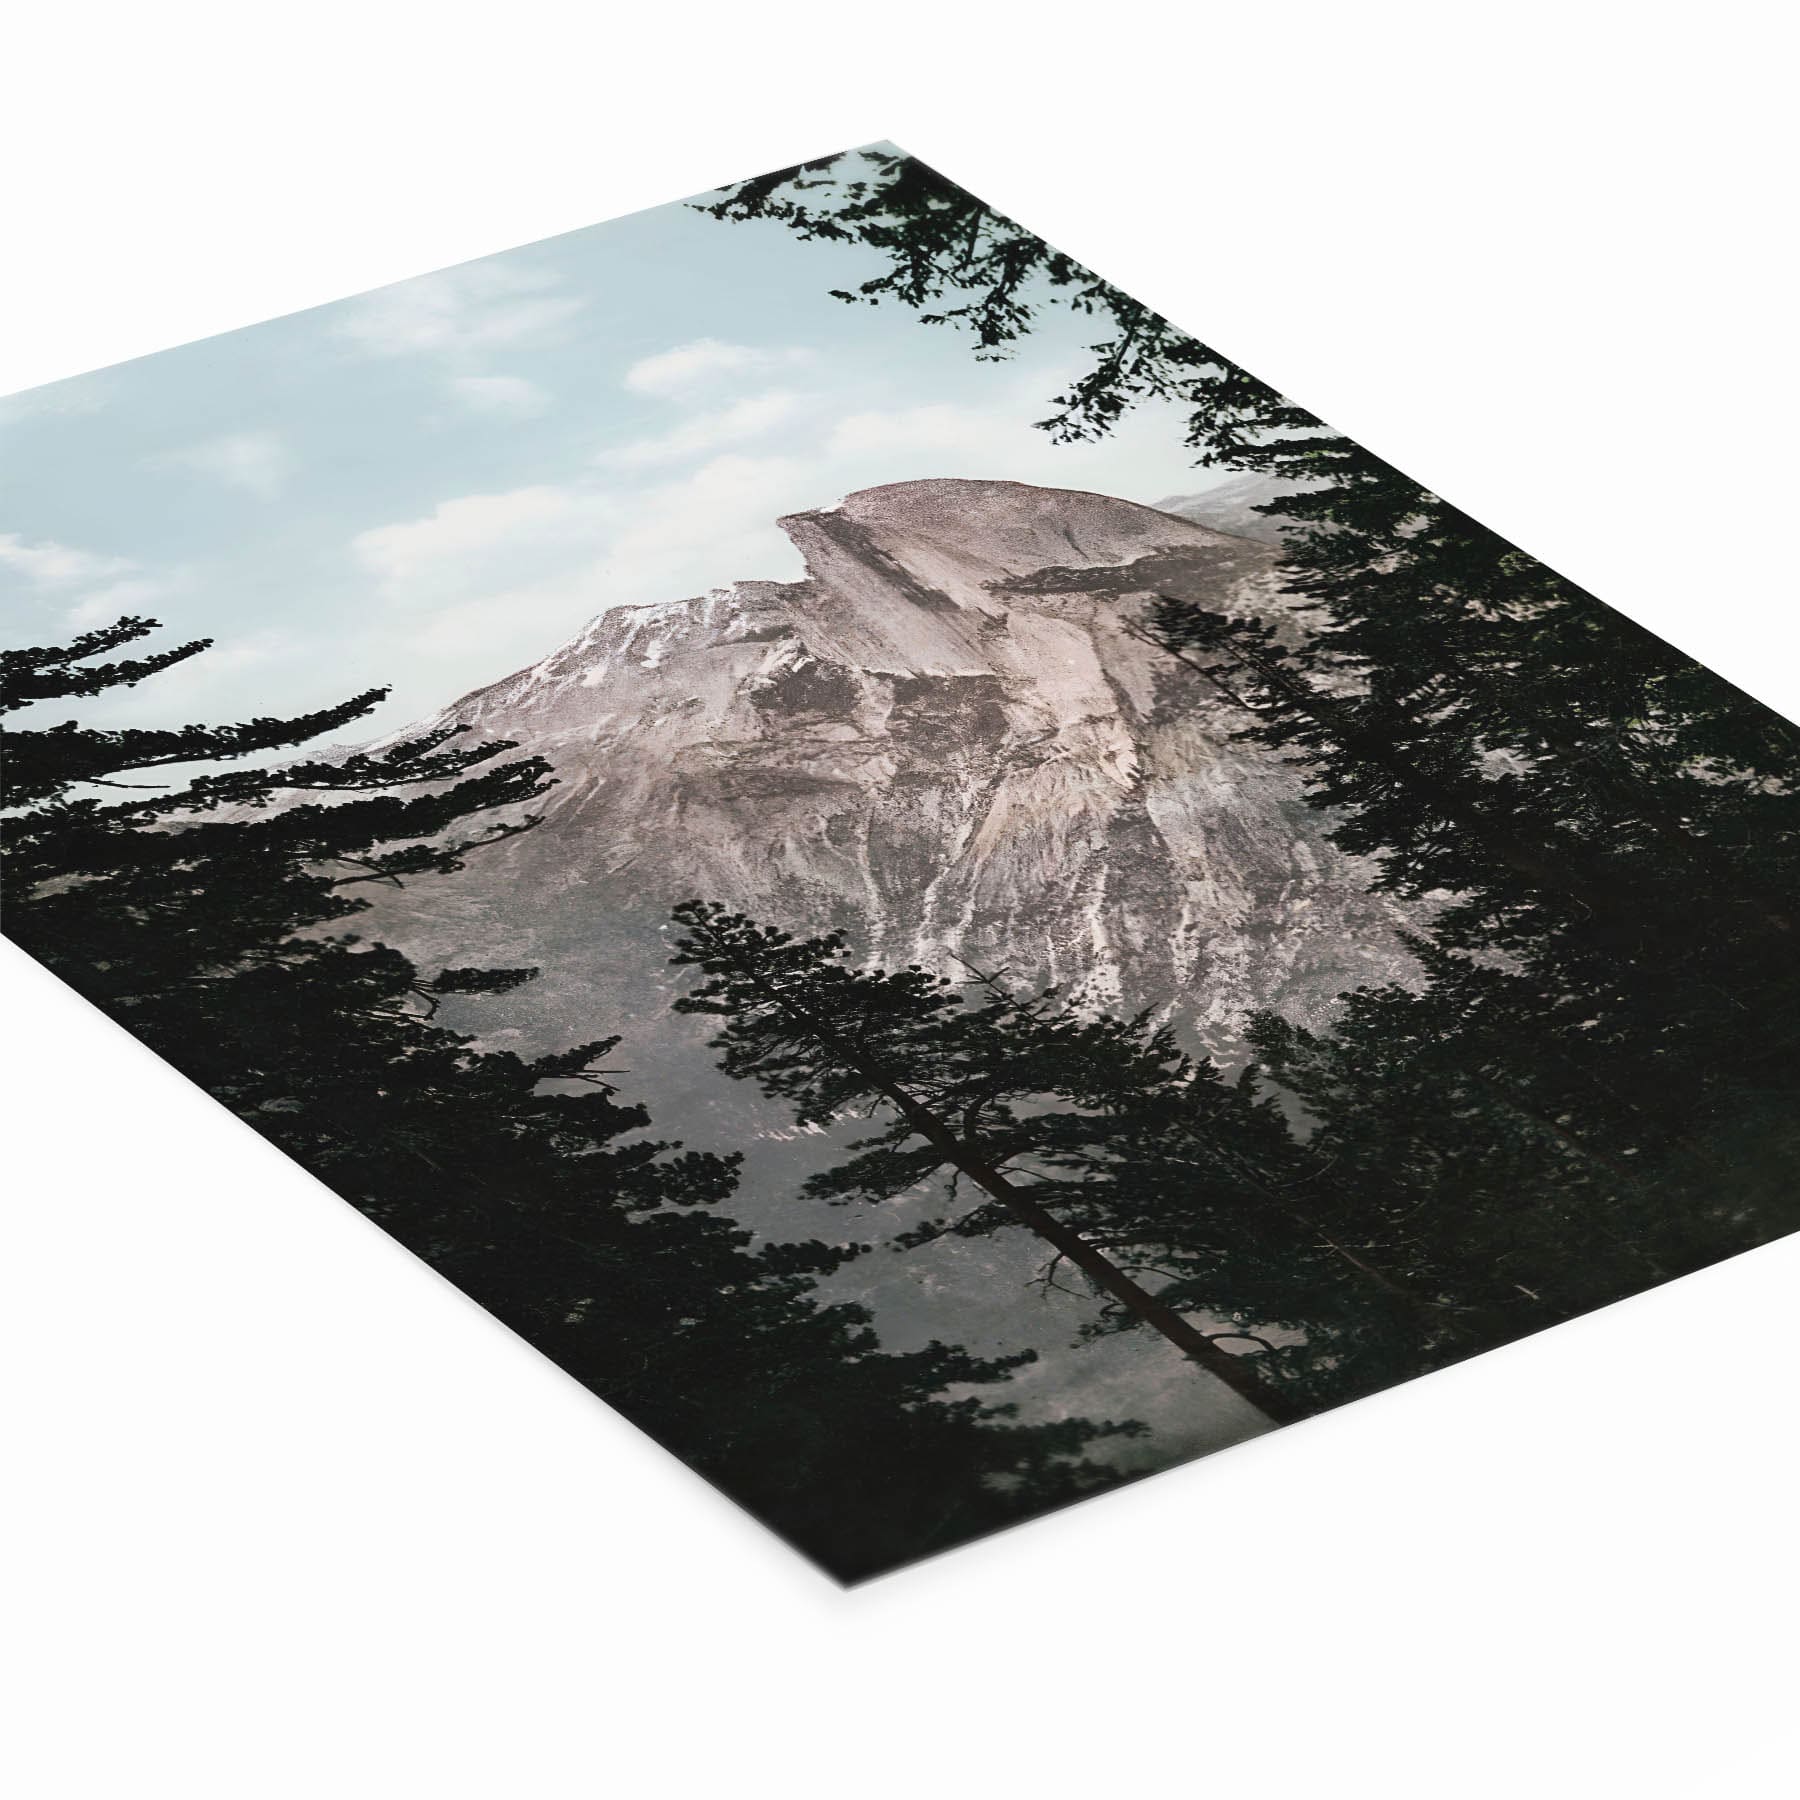 Vintage Yosemite Valley National Park Picture Laying Flat on a White Background